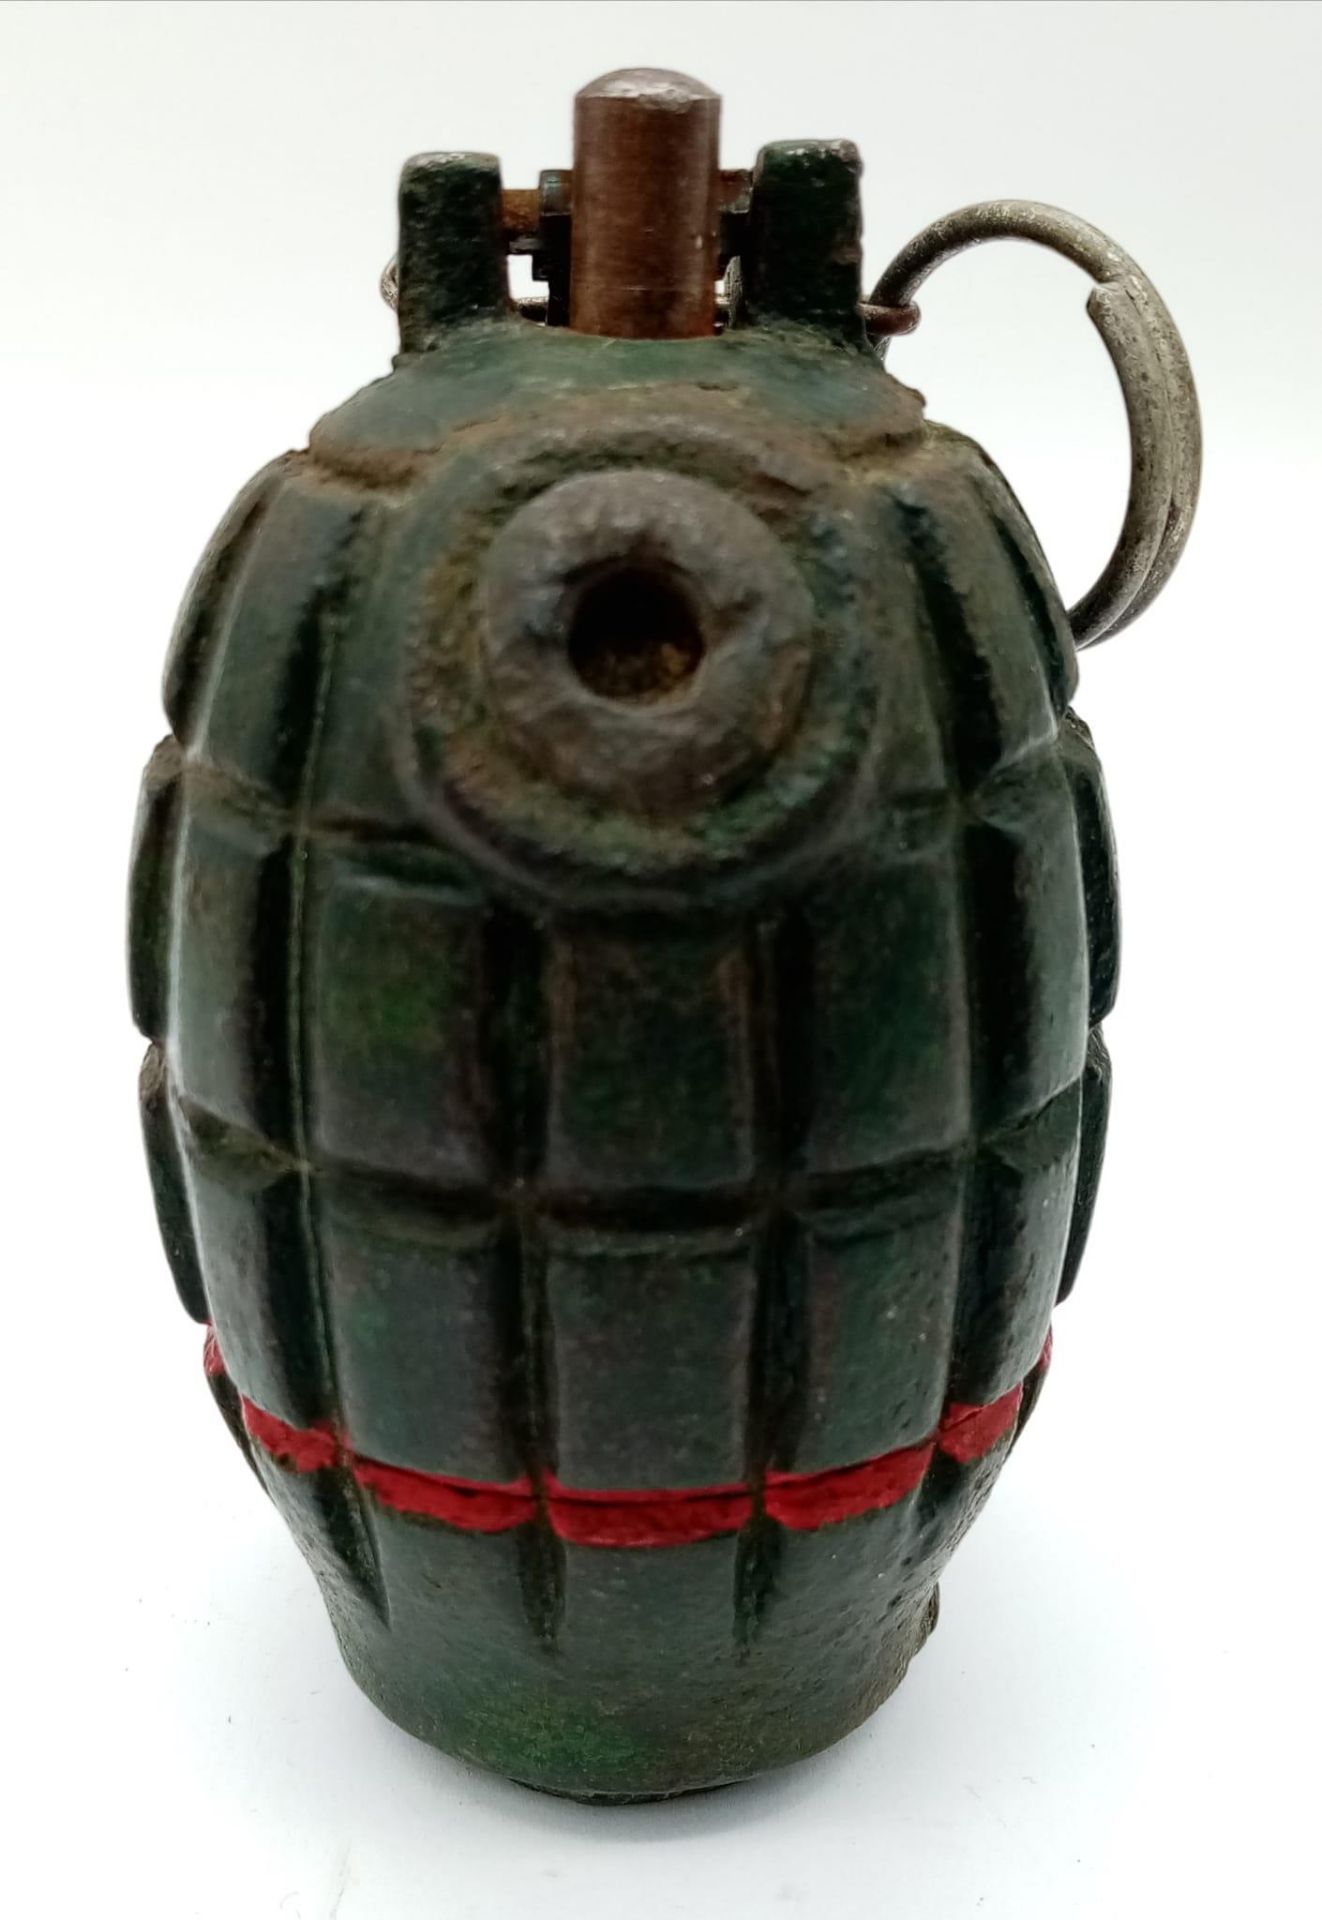 INERT Israeli Made No 36 Mills Grenade. Circa late 1940s-Mid 1950’s. UK Mainland Sales Only. - Image 2 of 6